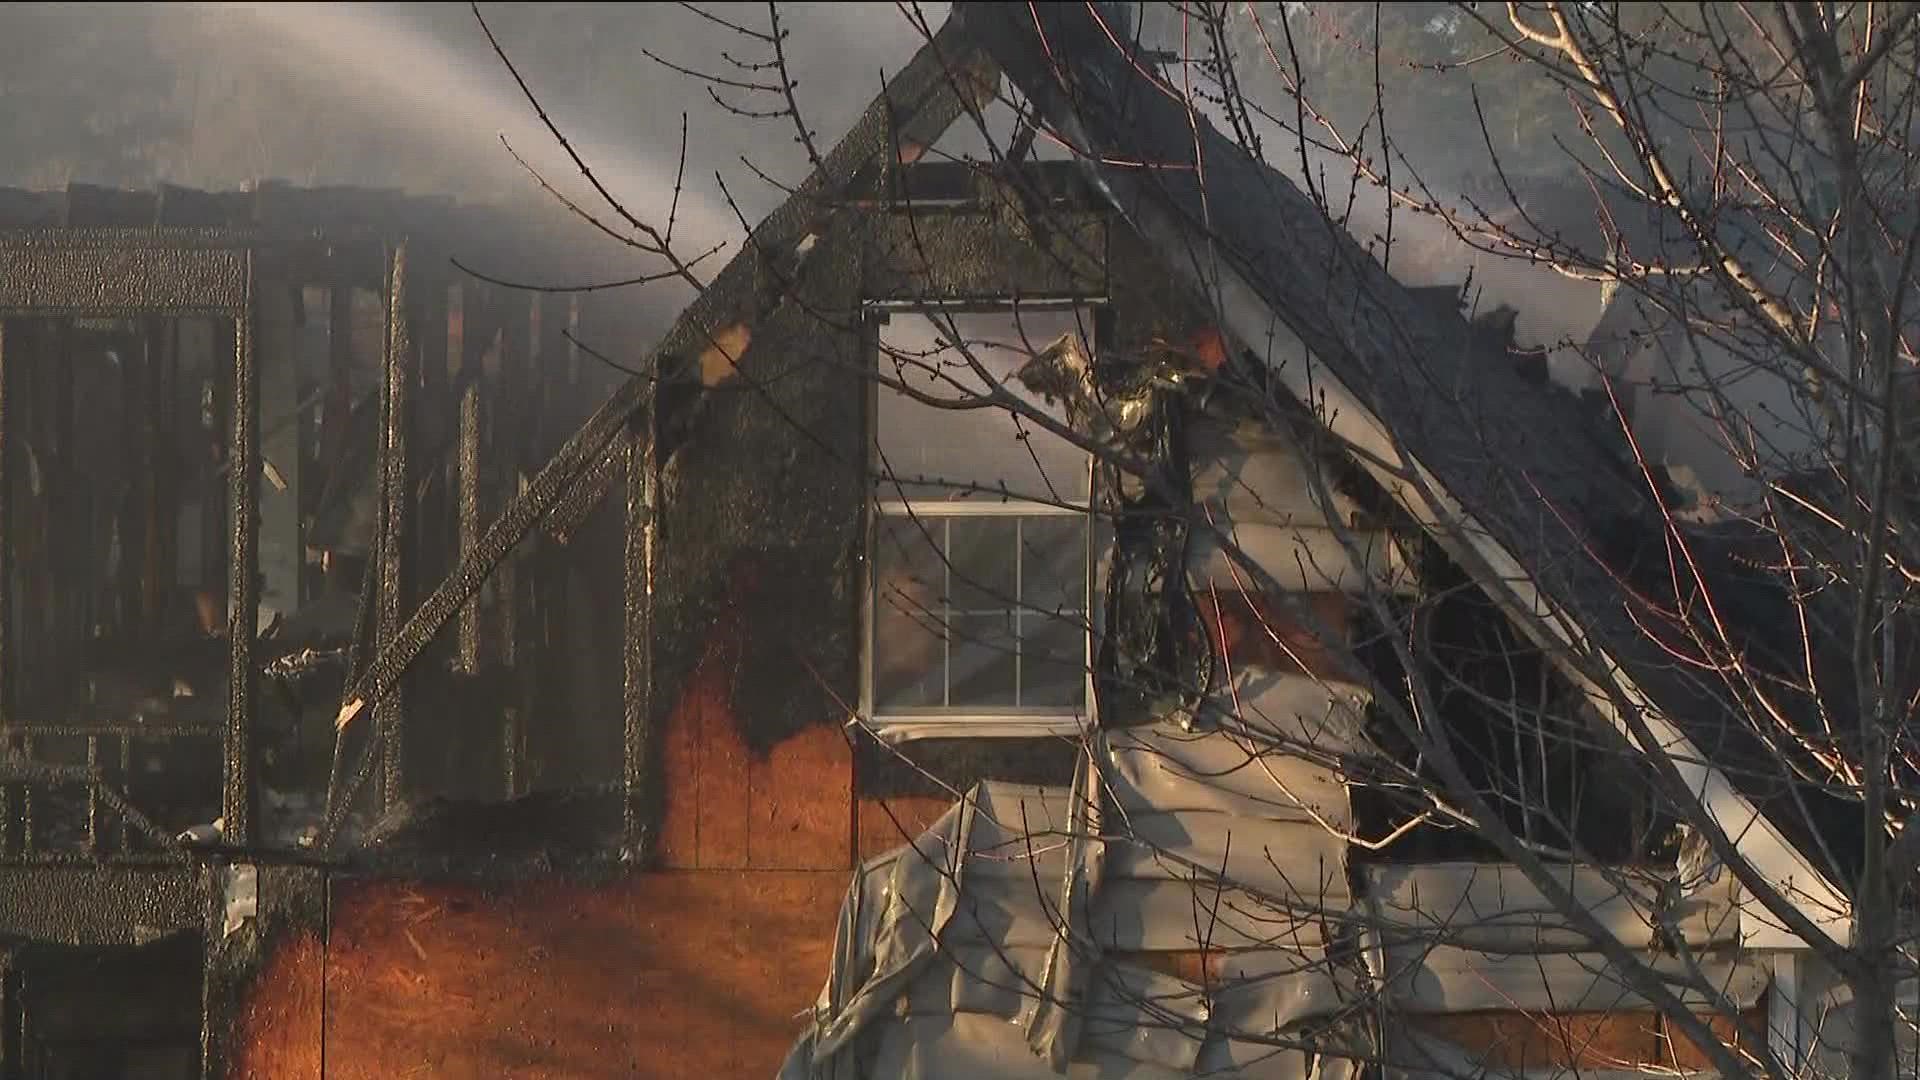 DeKalb County Fire Rescue responded to a two-story house fire in Lithonia on Sunday afternoon.